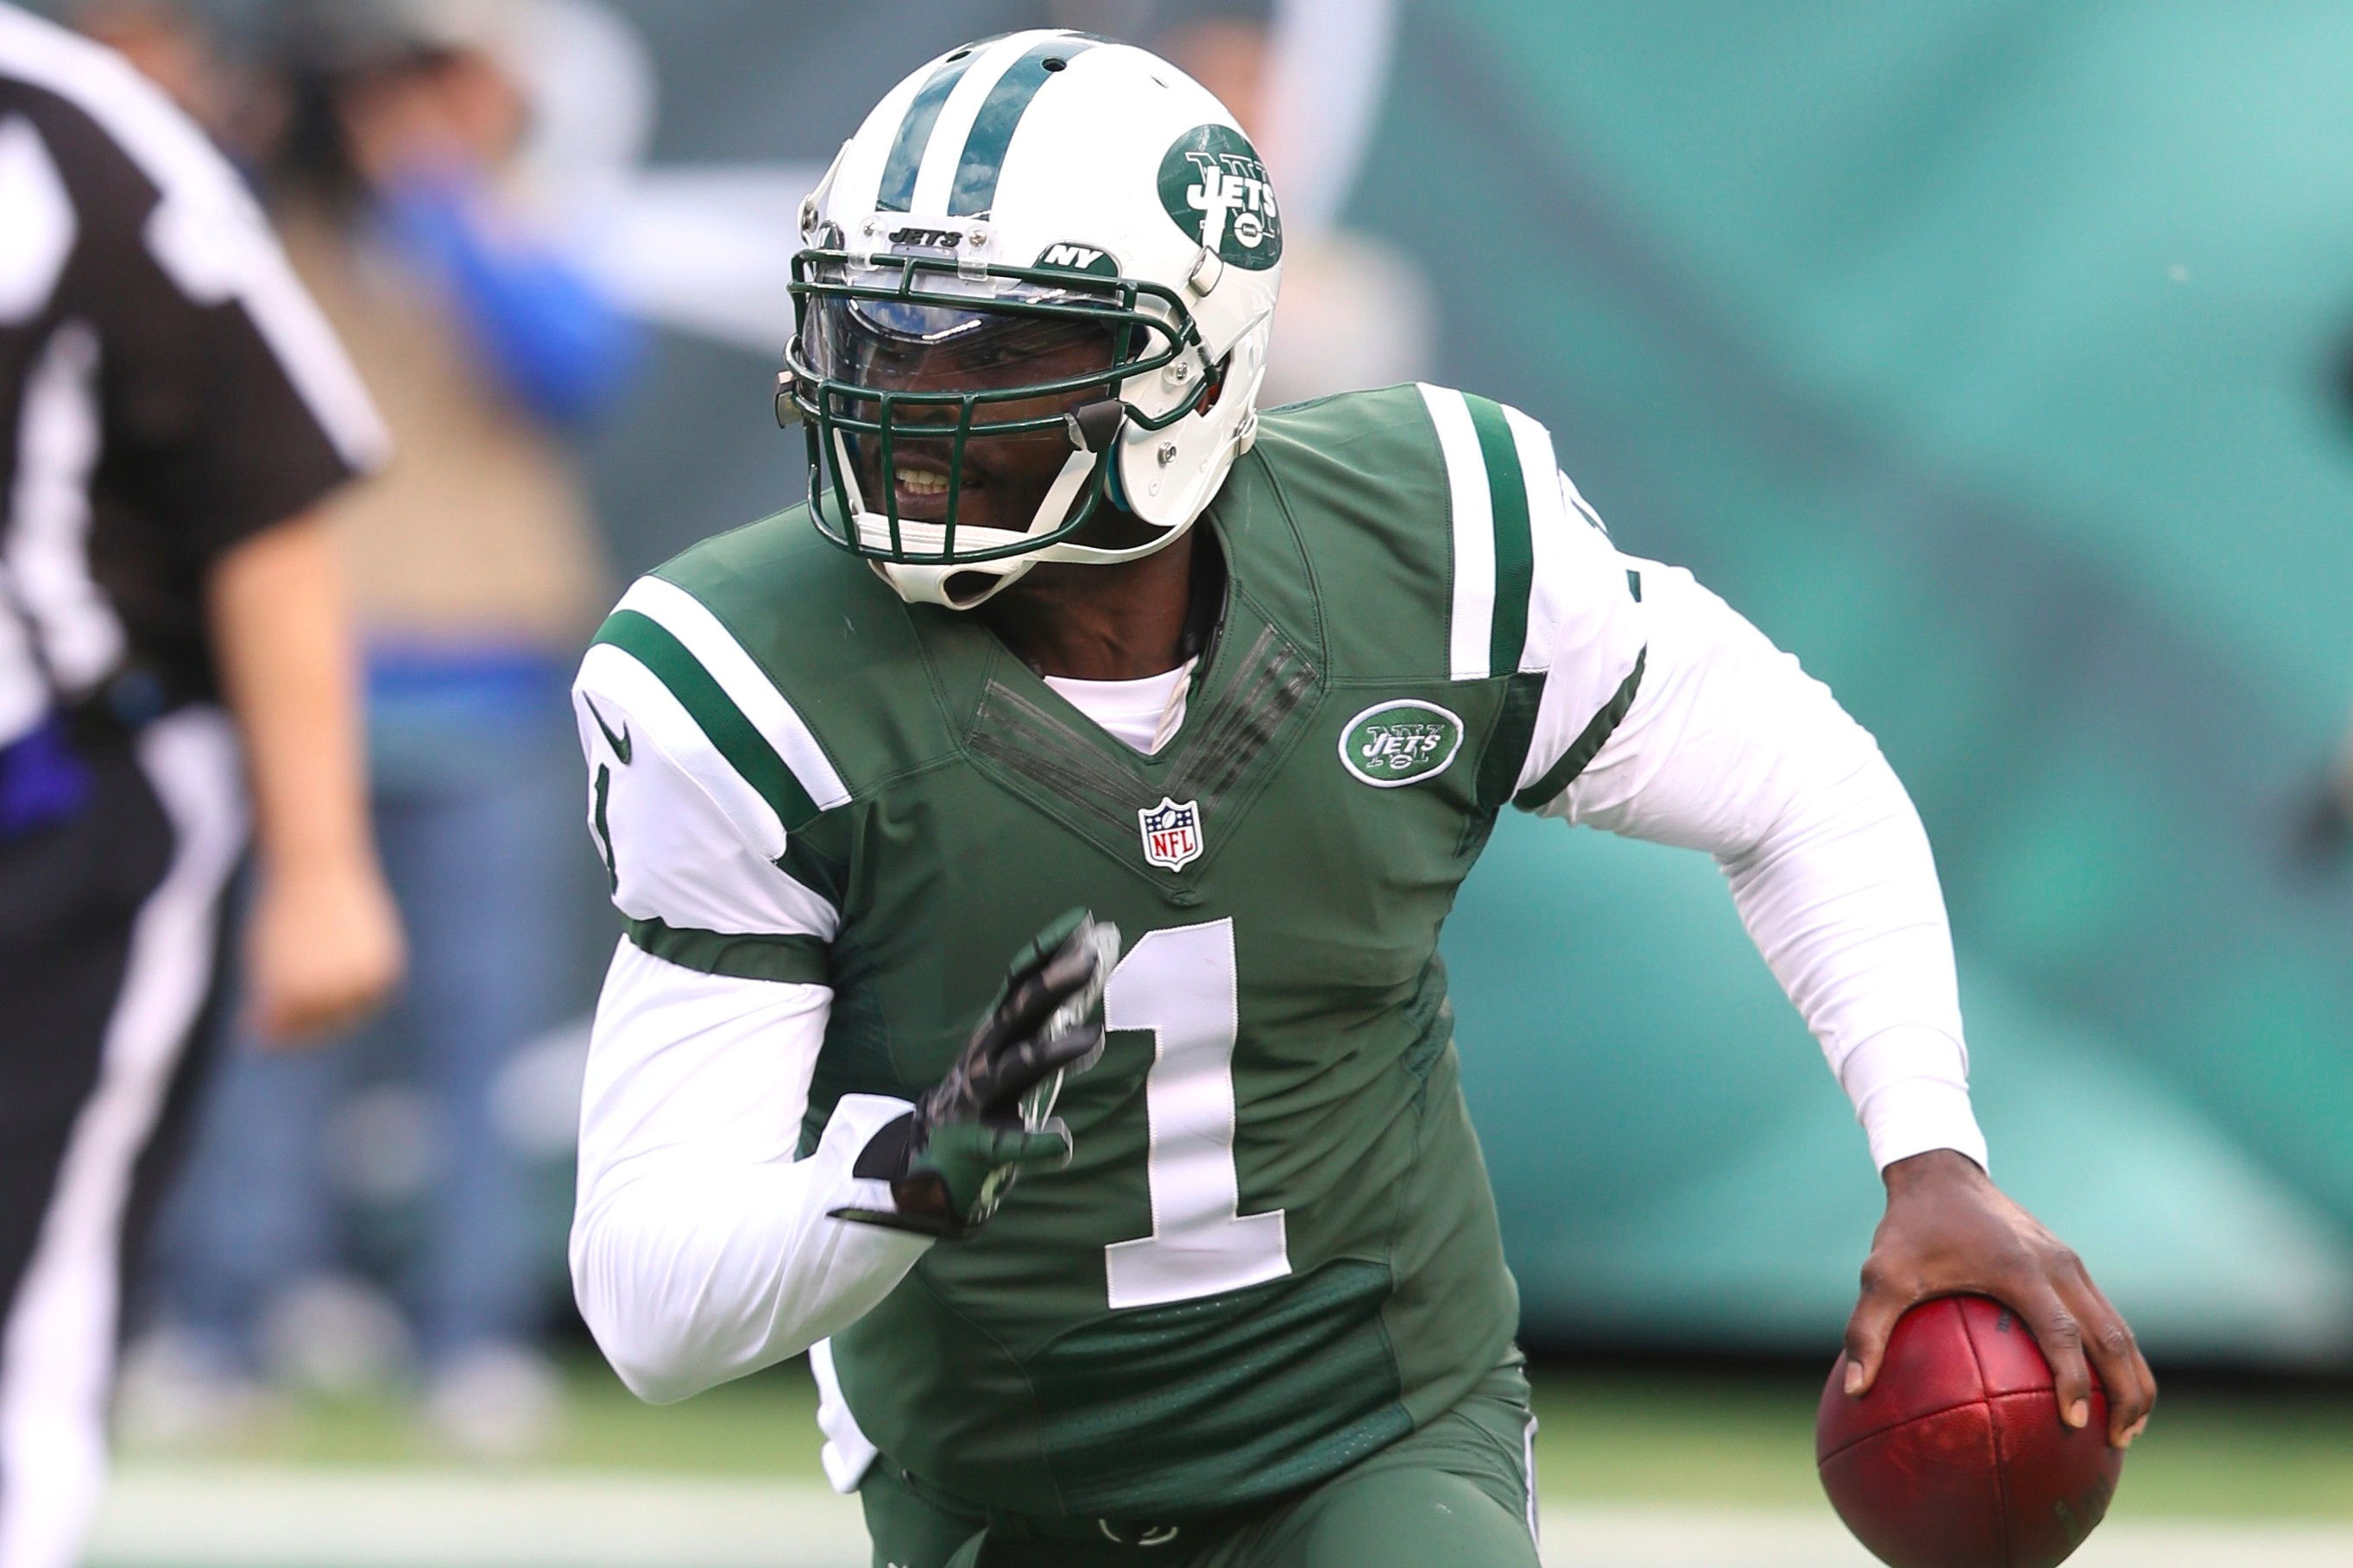 2726x1817 After all the thrills and horrors, Michael Vick still a must-watch | New  York Post